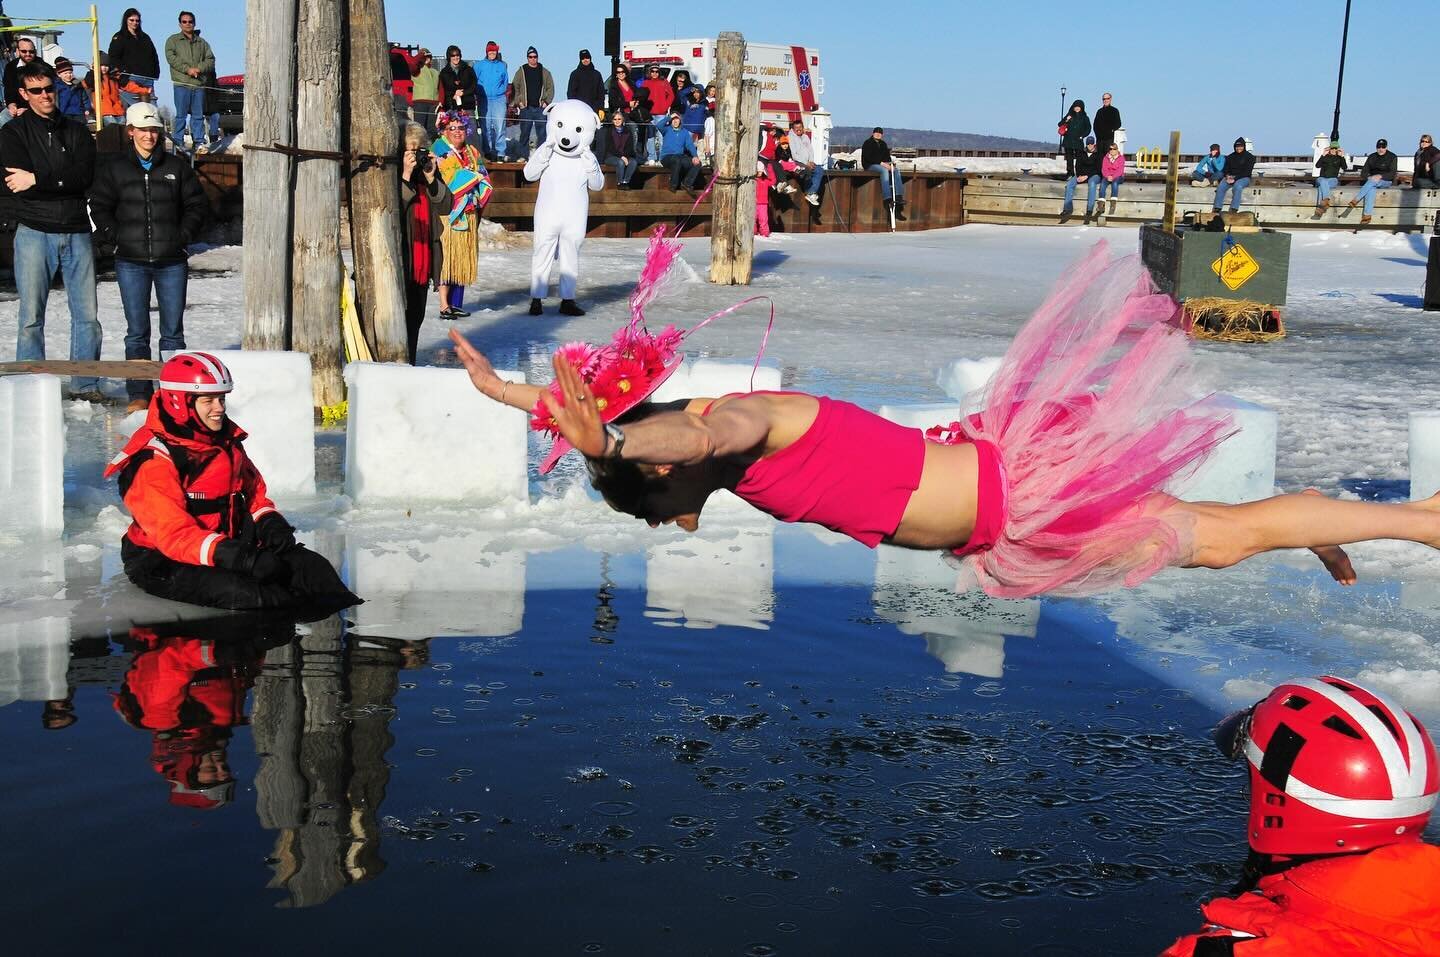 The weather keeps us guessing if it&rsquo;s winter or spring right now 🤷&zwj;♀️ but whatever the weather, we are so excited for Winter Fest and the Polar Plunge in Bayfield this weekend! We still have availability if you&rsquo;re looking for a fun b